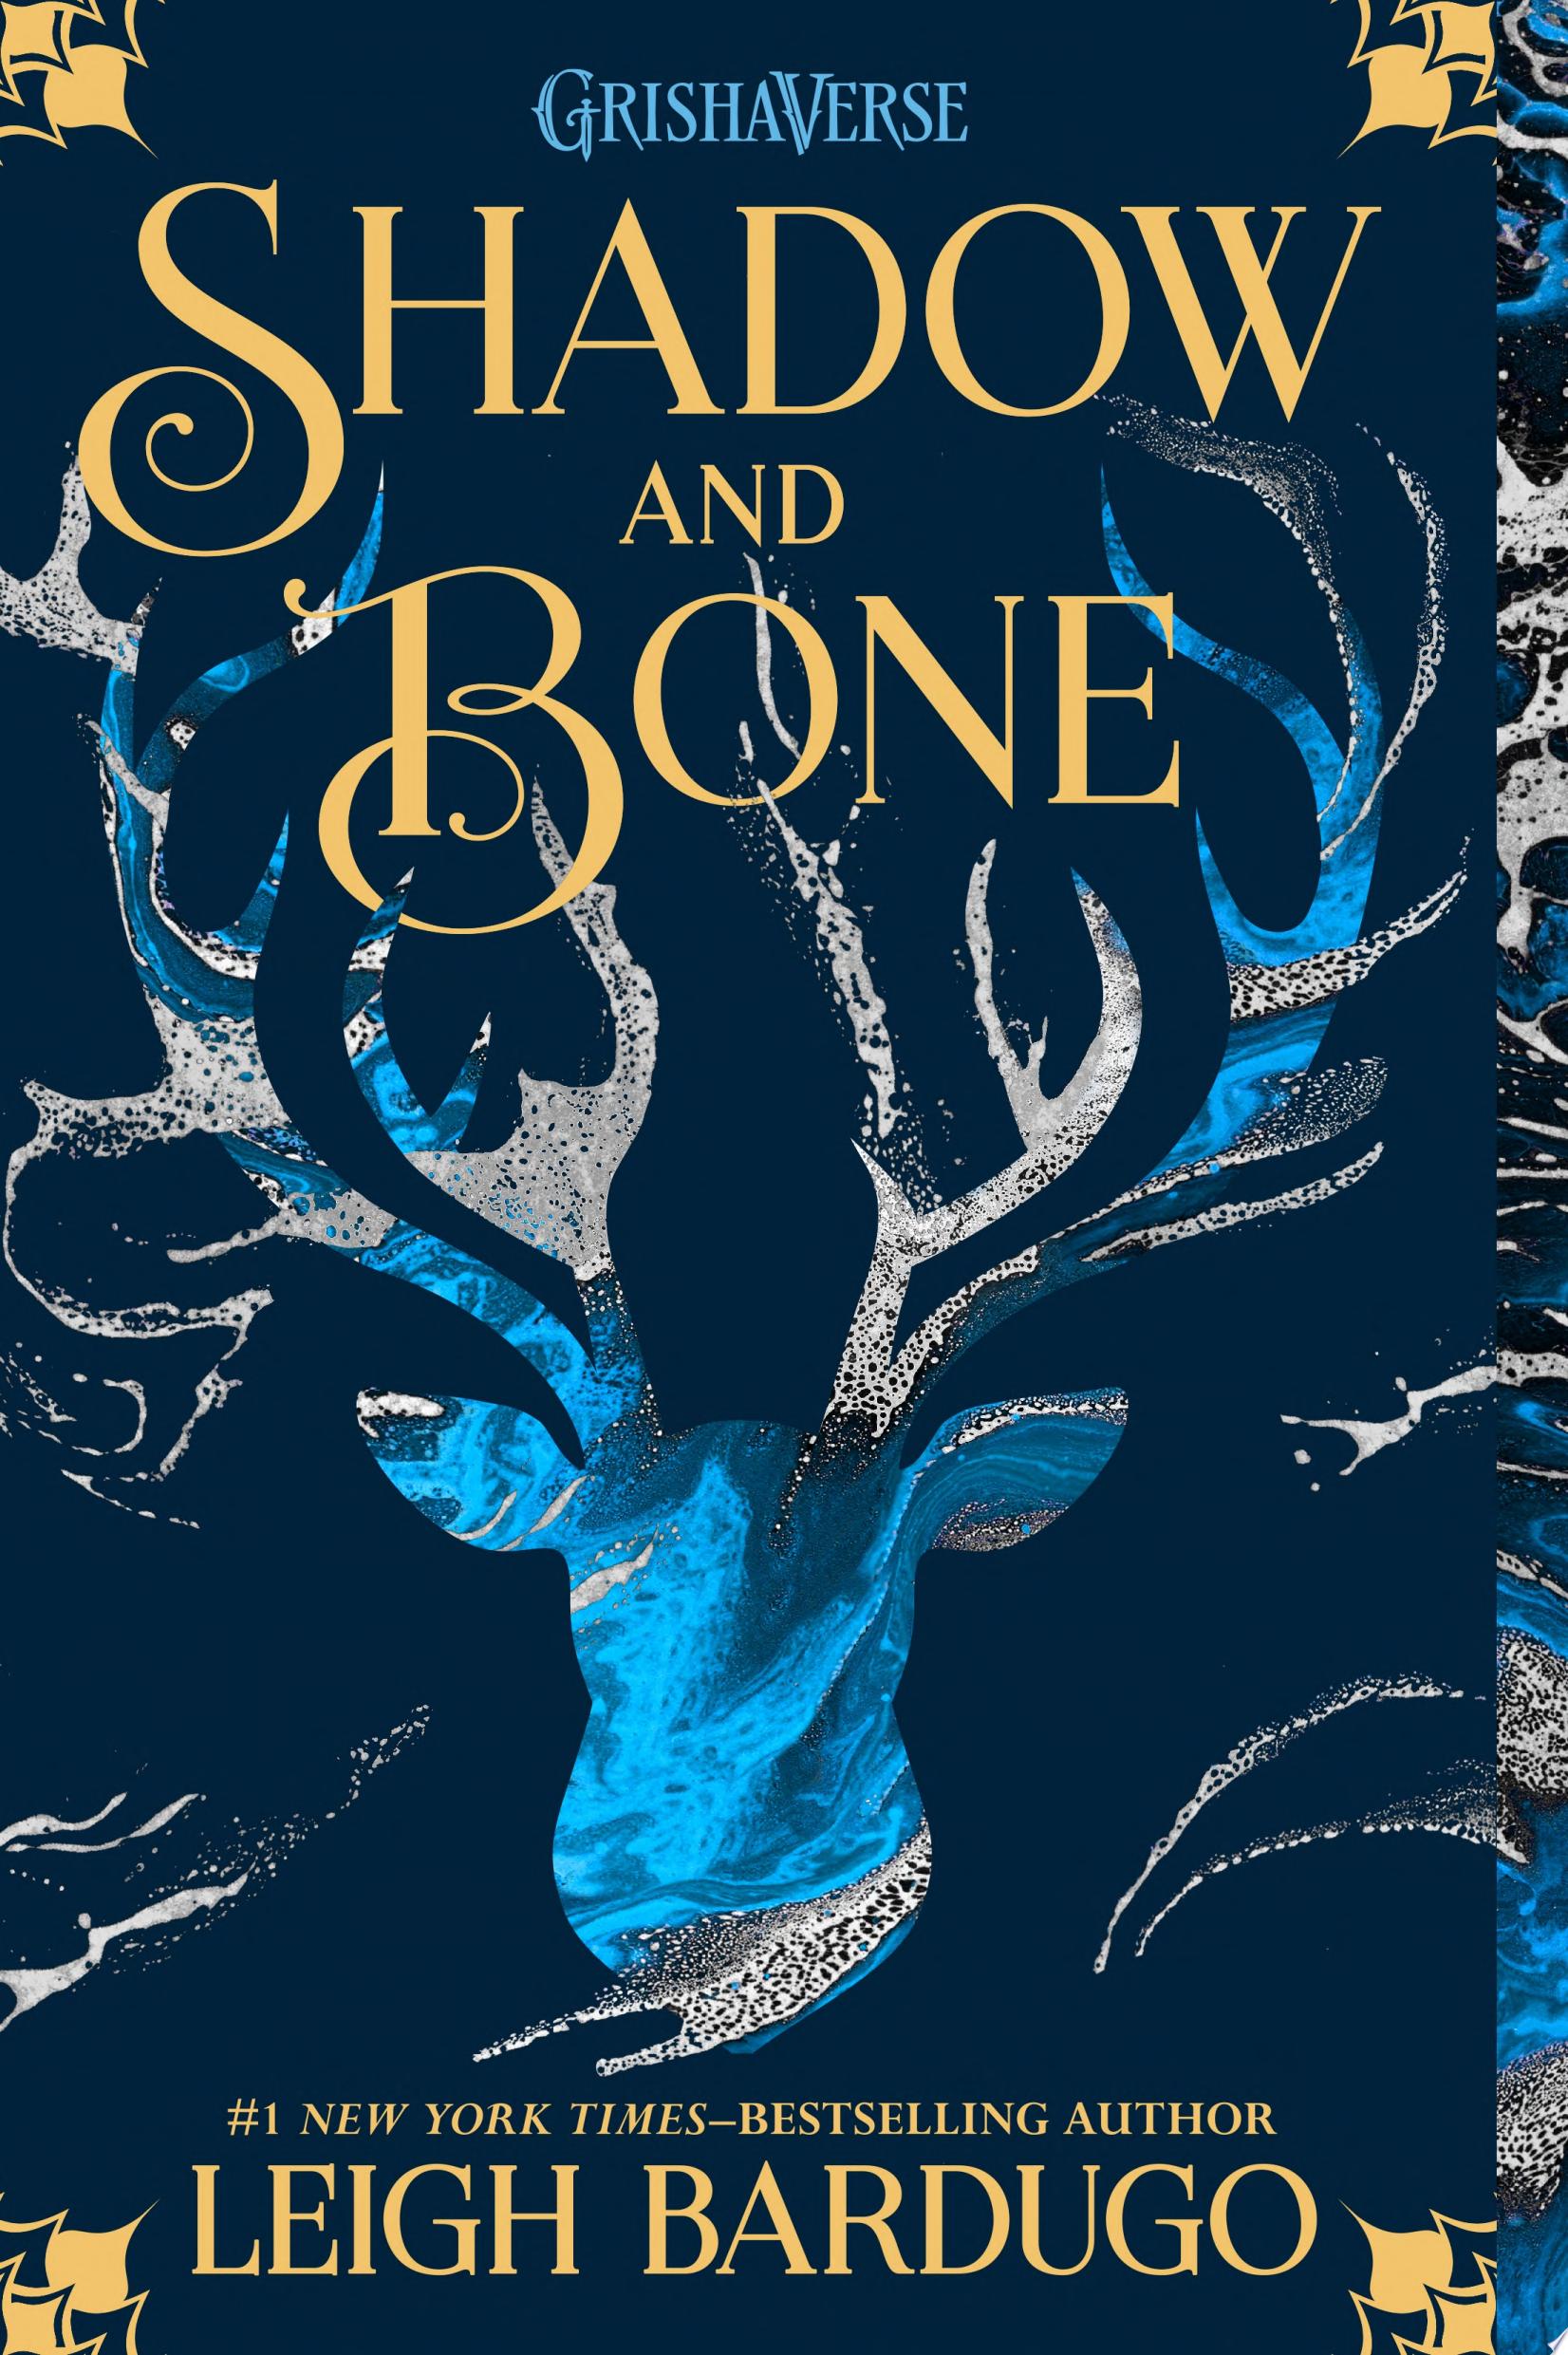 Image for "Shadow and Bone"